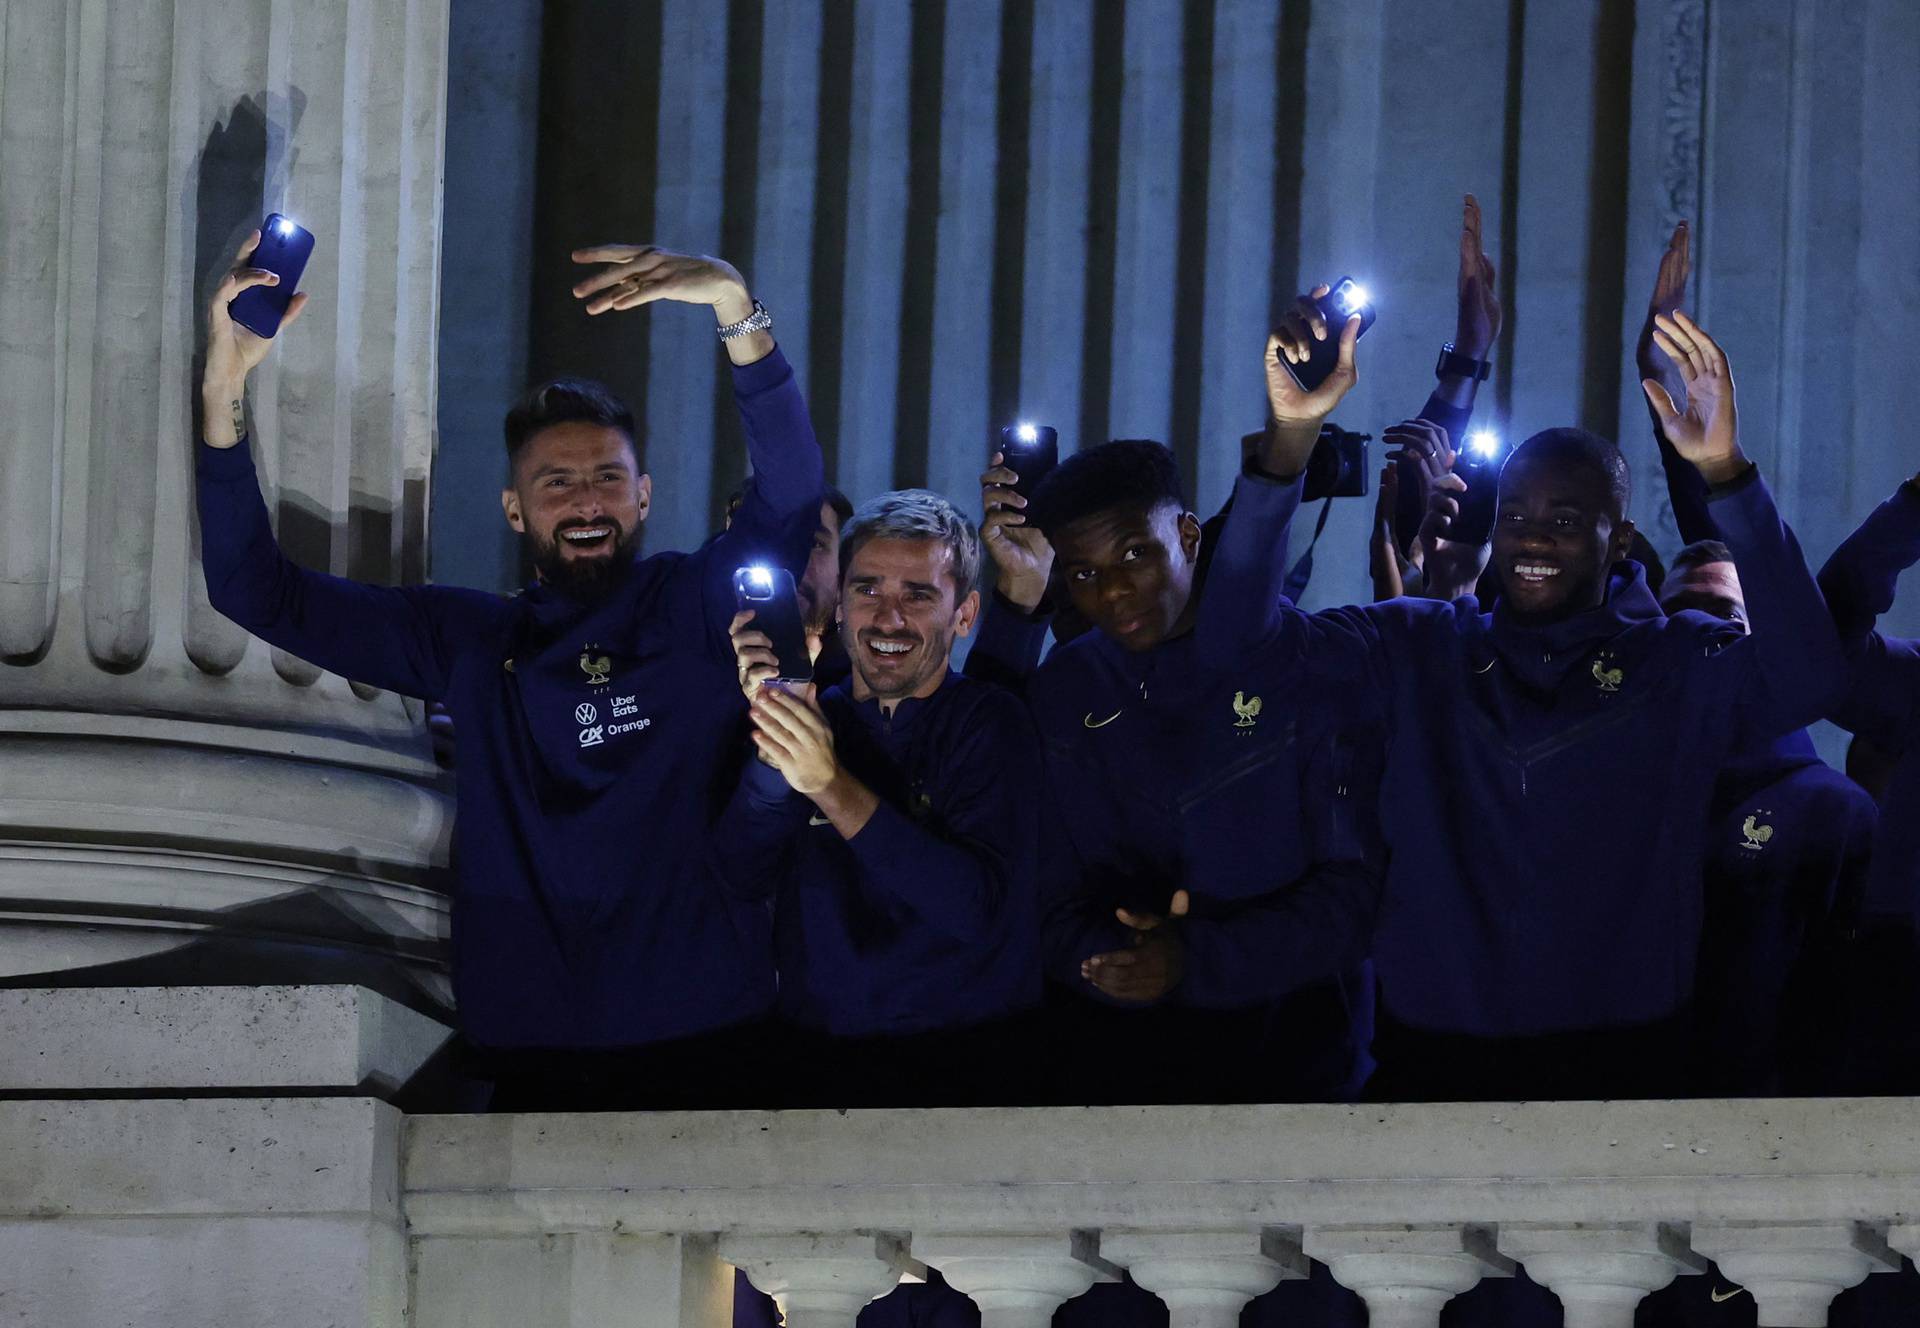 France team at Hotel Crillon after losing in the World Cup Final against Argentina